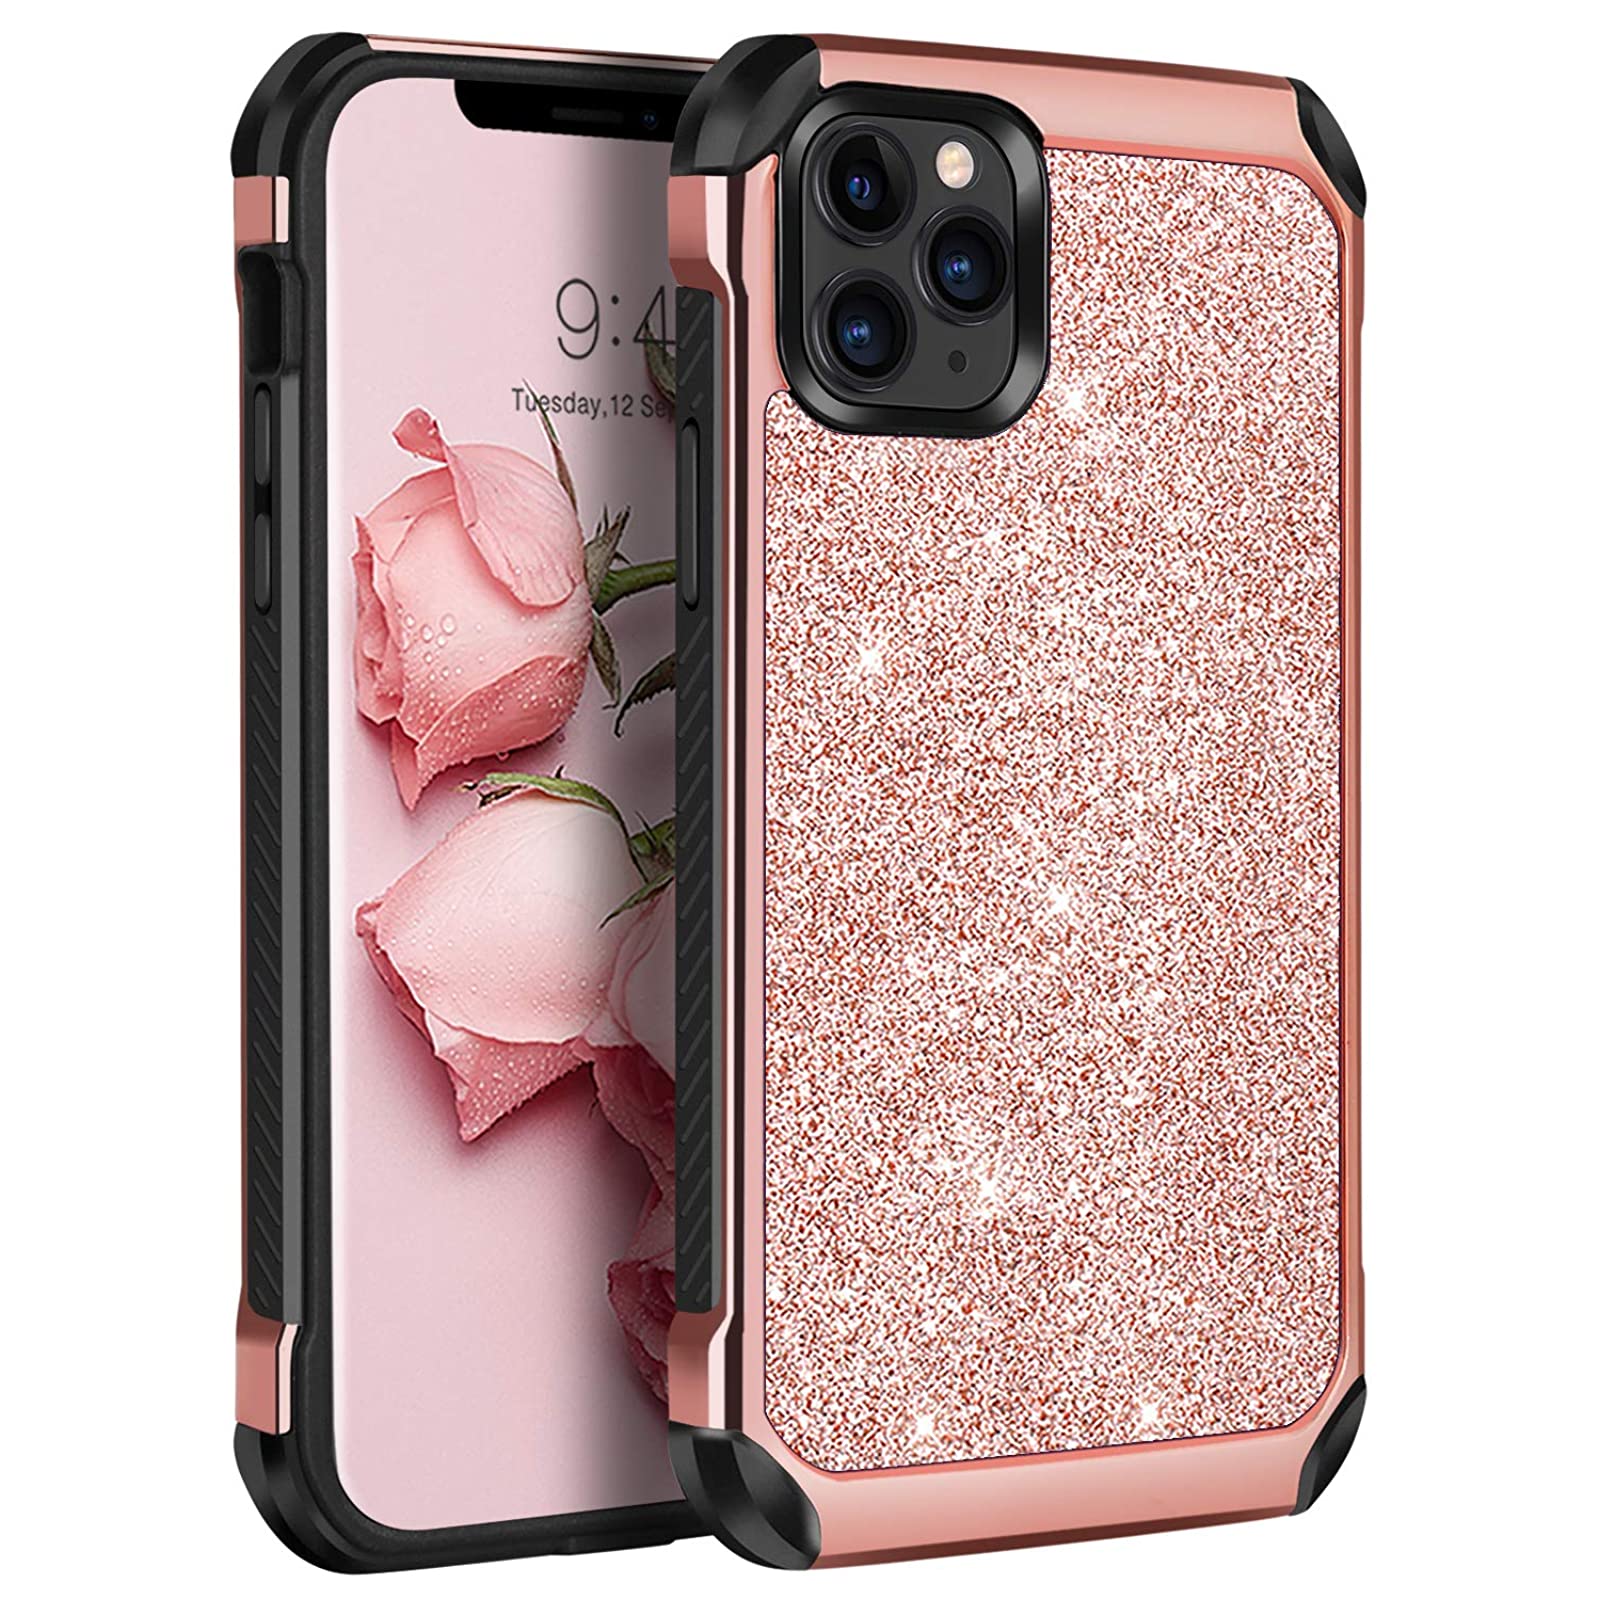 Bentoben Iphone 11 Pro Max Case Glitter Sparkly Slim Shockproof 2 In 1 Protective Shiny Girl Women Faux Leather Hybrid Soft Bumper Hard Pc Phone Cover For Apple Iphone 11 Pro Max